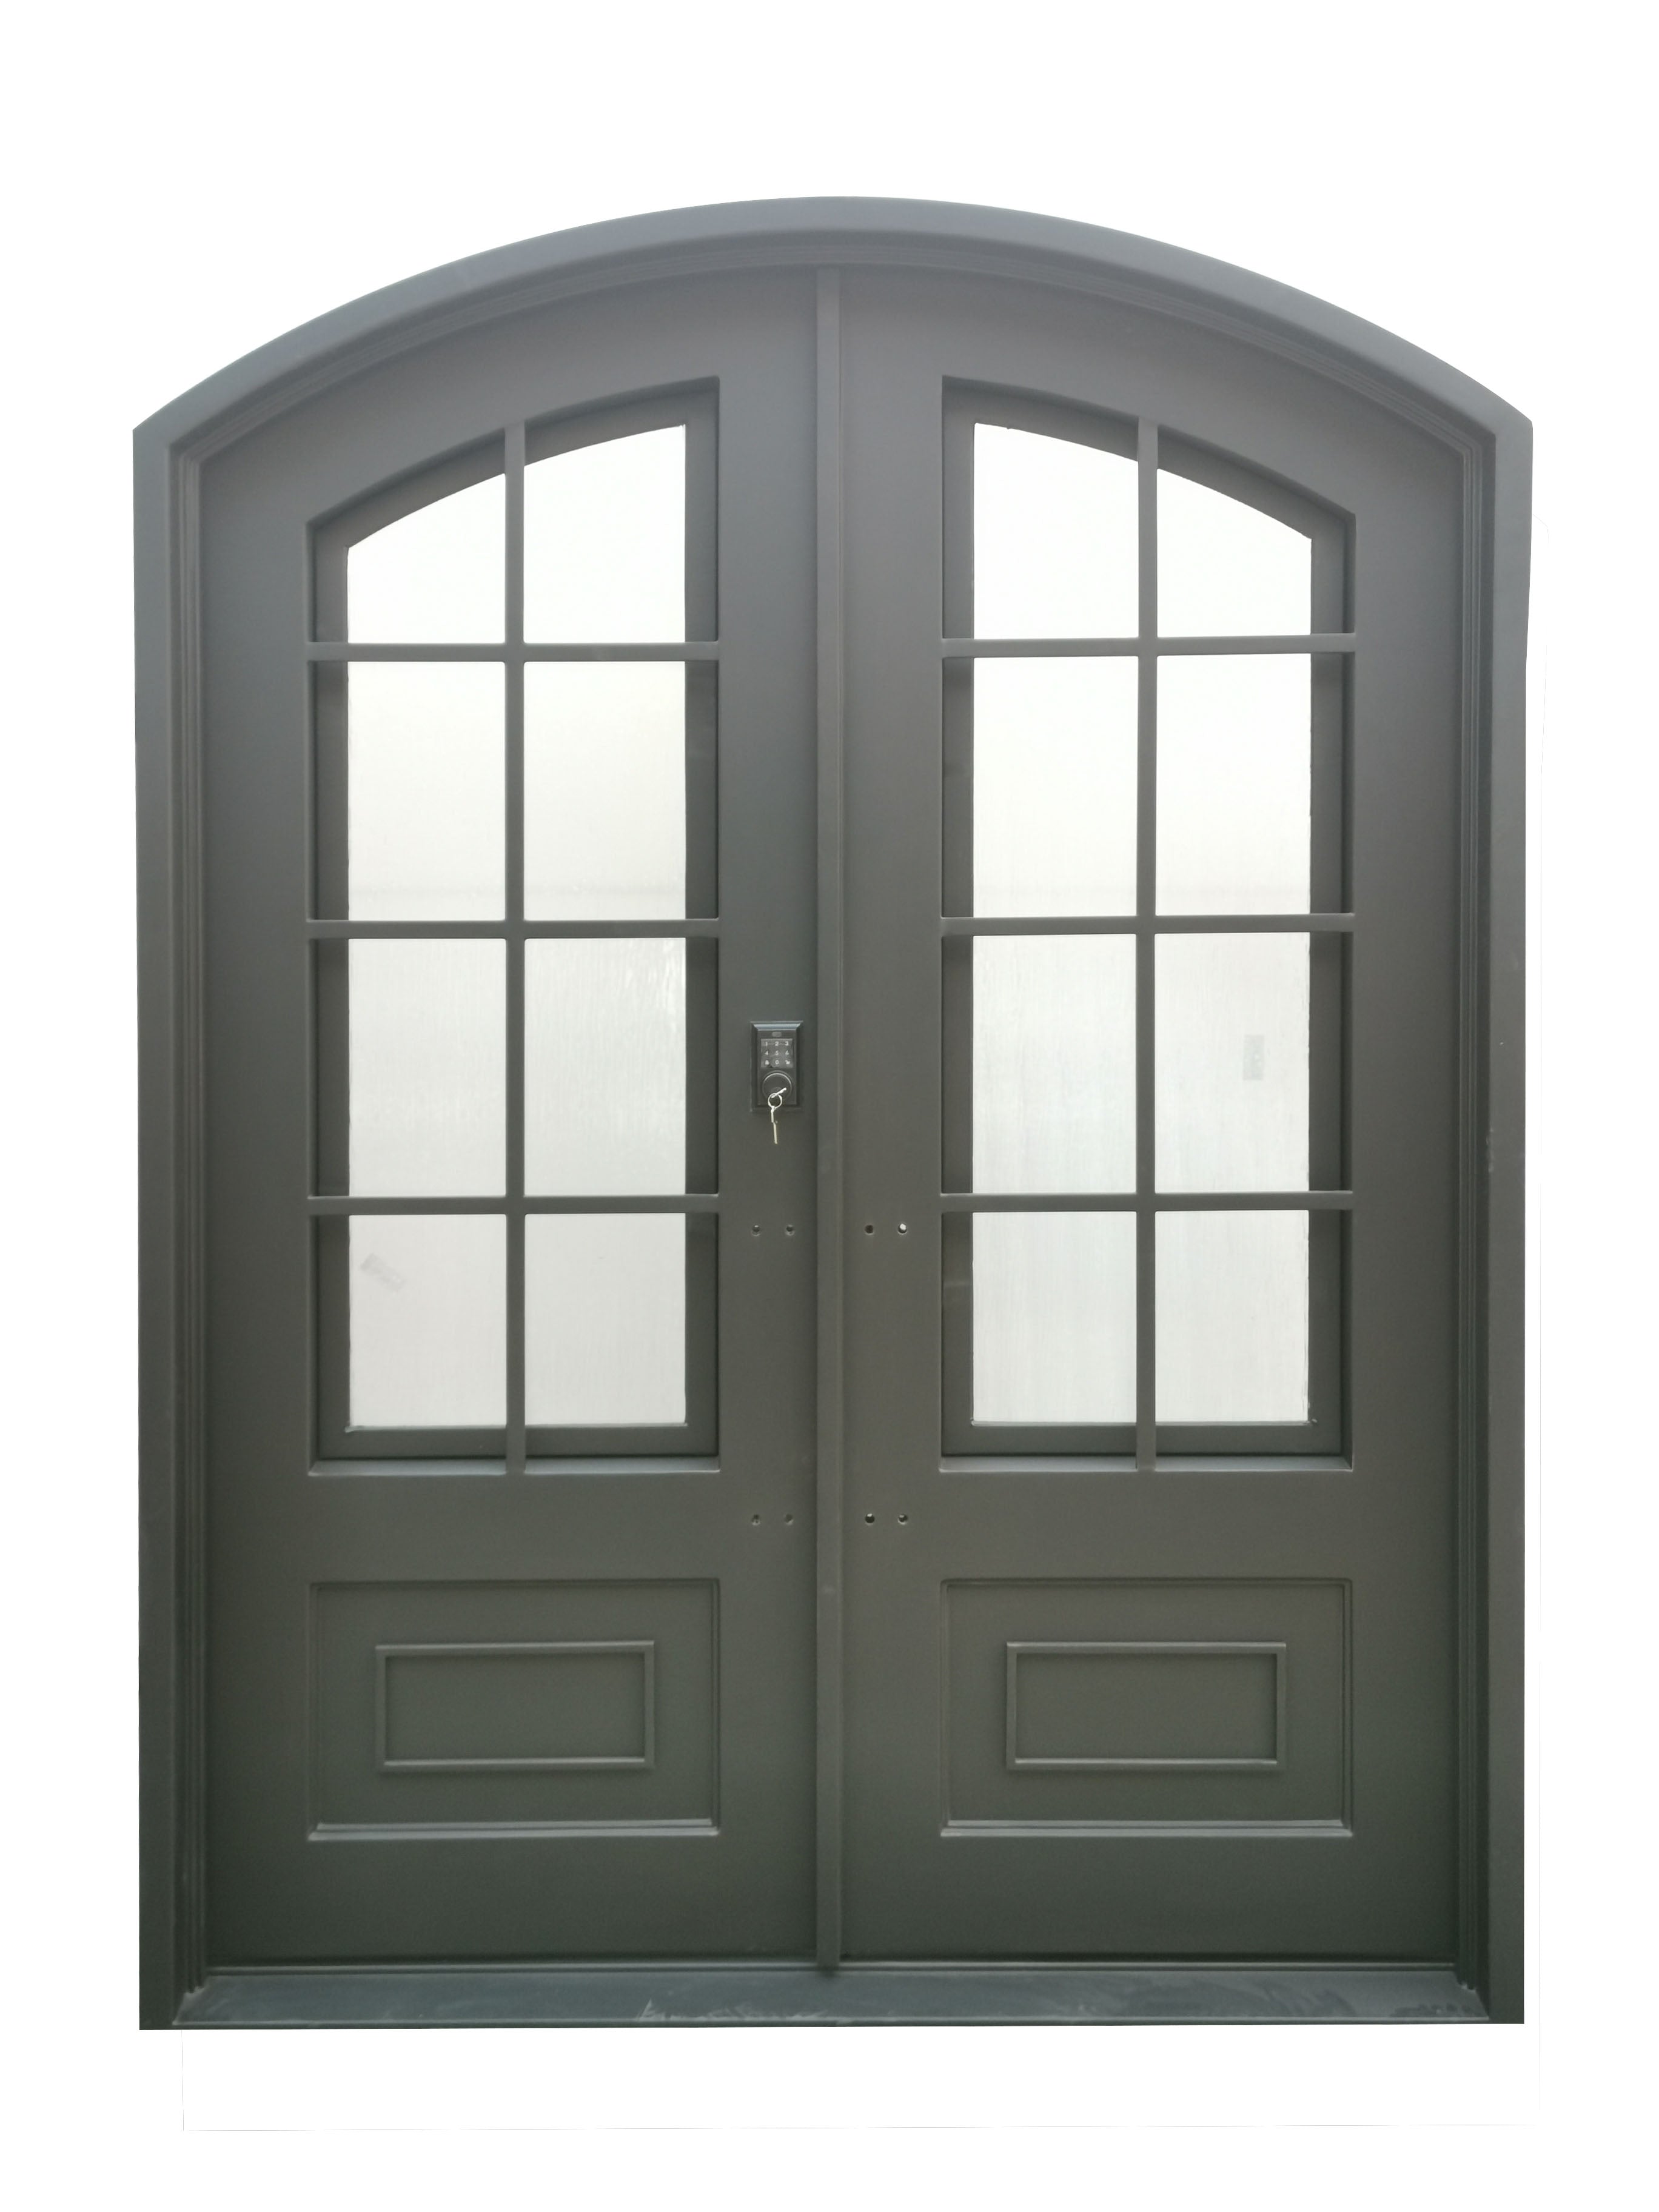 Anderson Model Double Front Entry Iron Door With Tempered Rain Glass Dark Bronze Finish - AAWAIZ IMPORTS